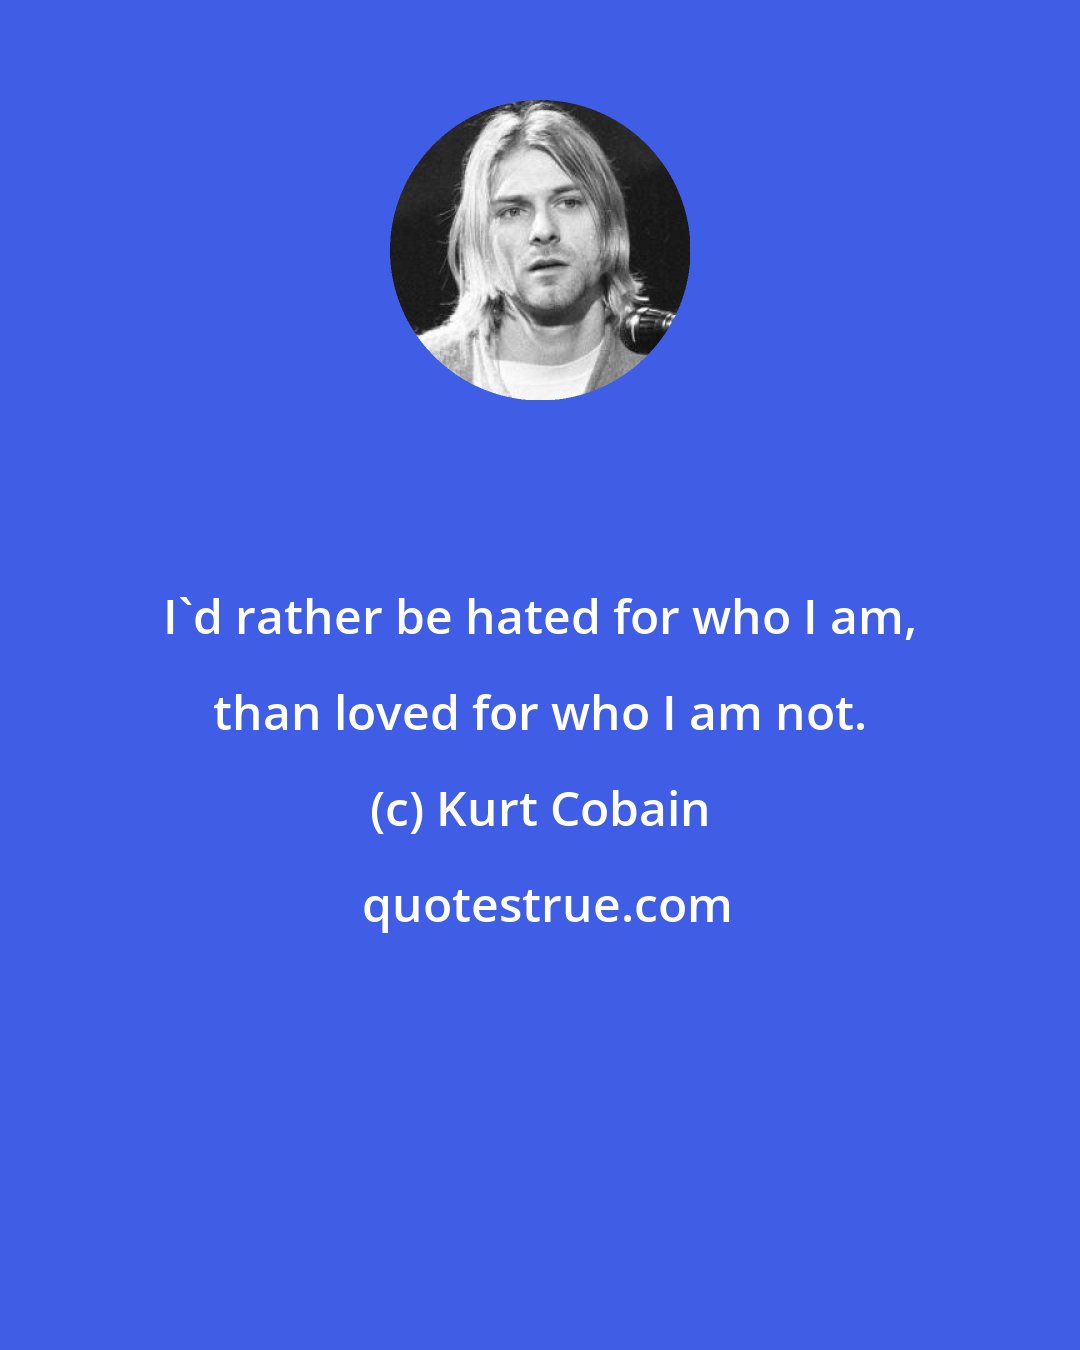 Kurt Cobain: I'd rather be hated for who I am, than loved for who I am not.